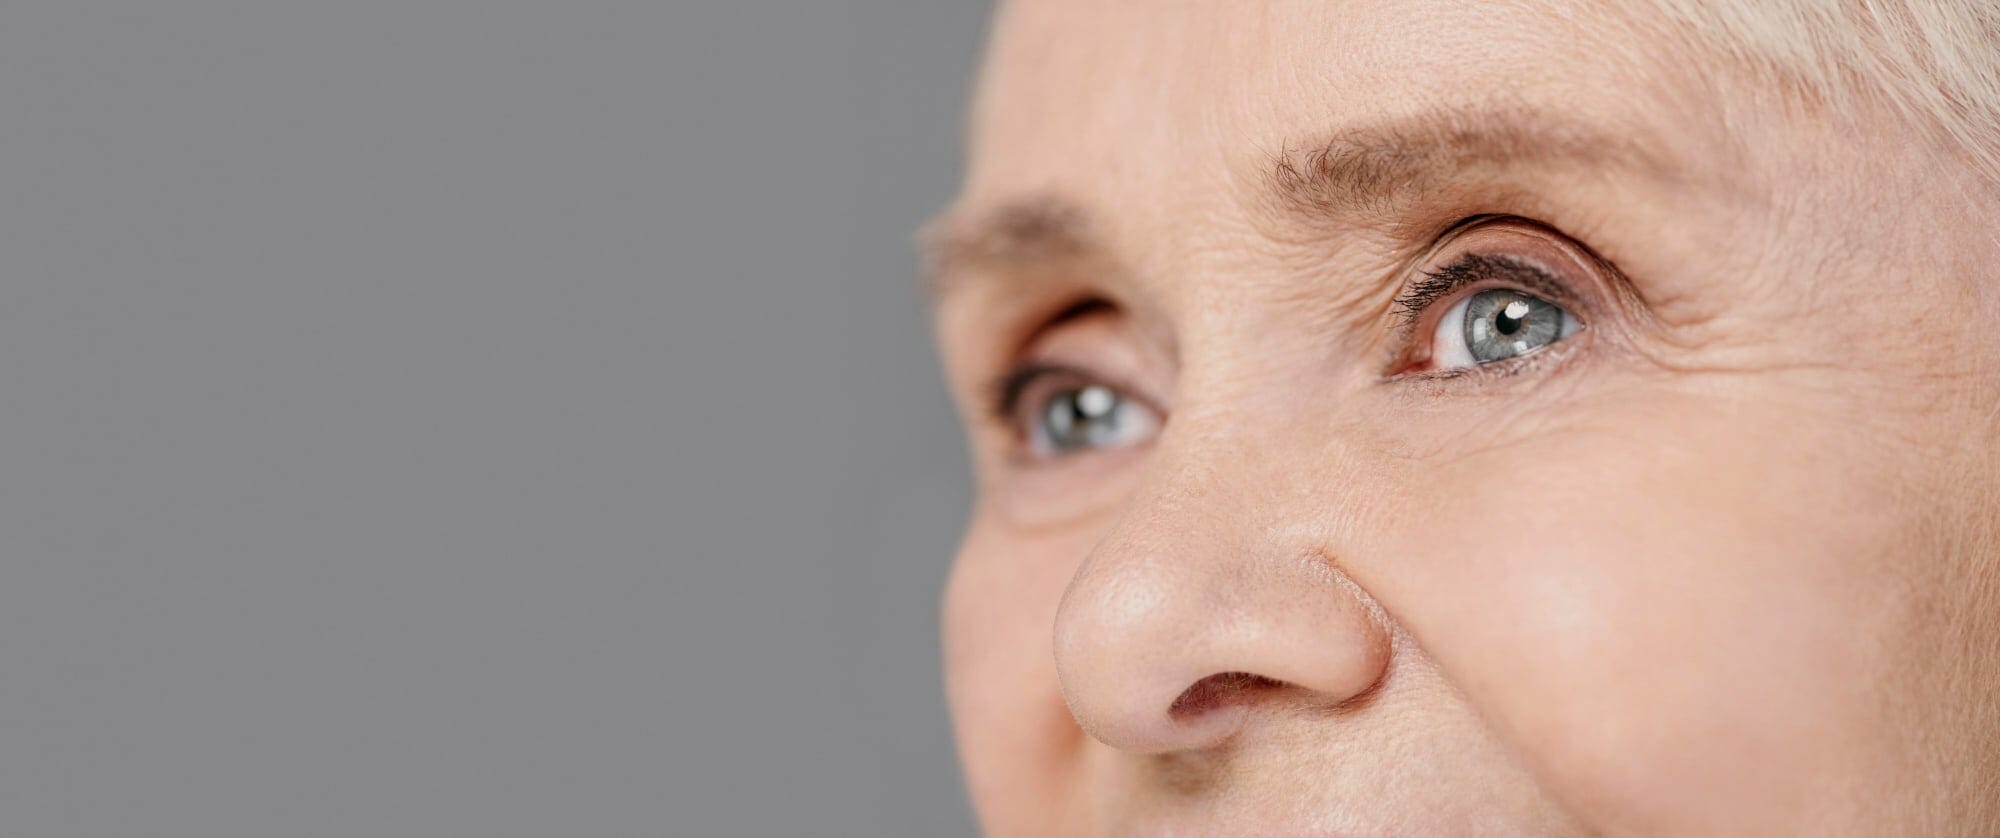 Cataract: Symptoms, Complications, and Management